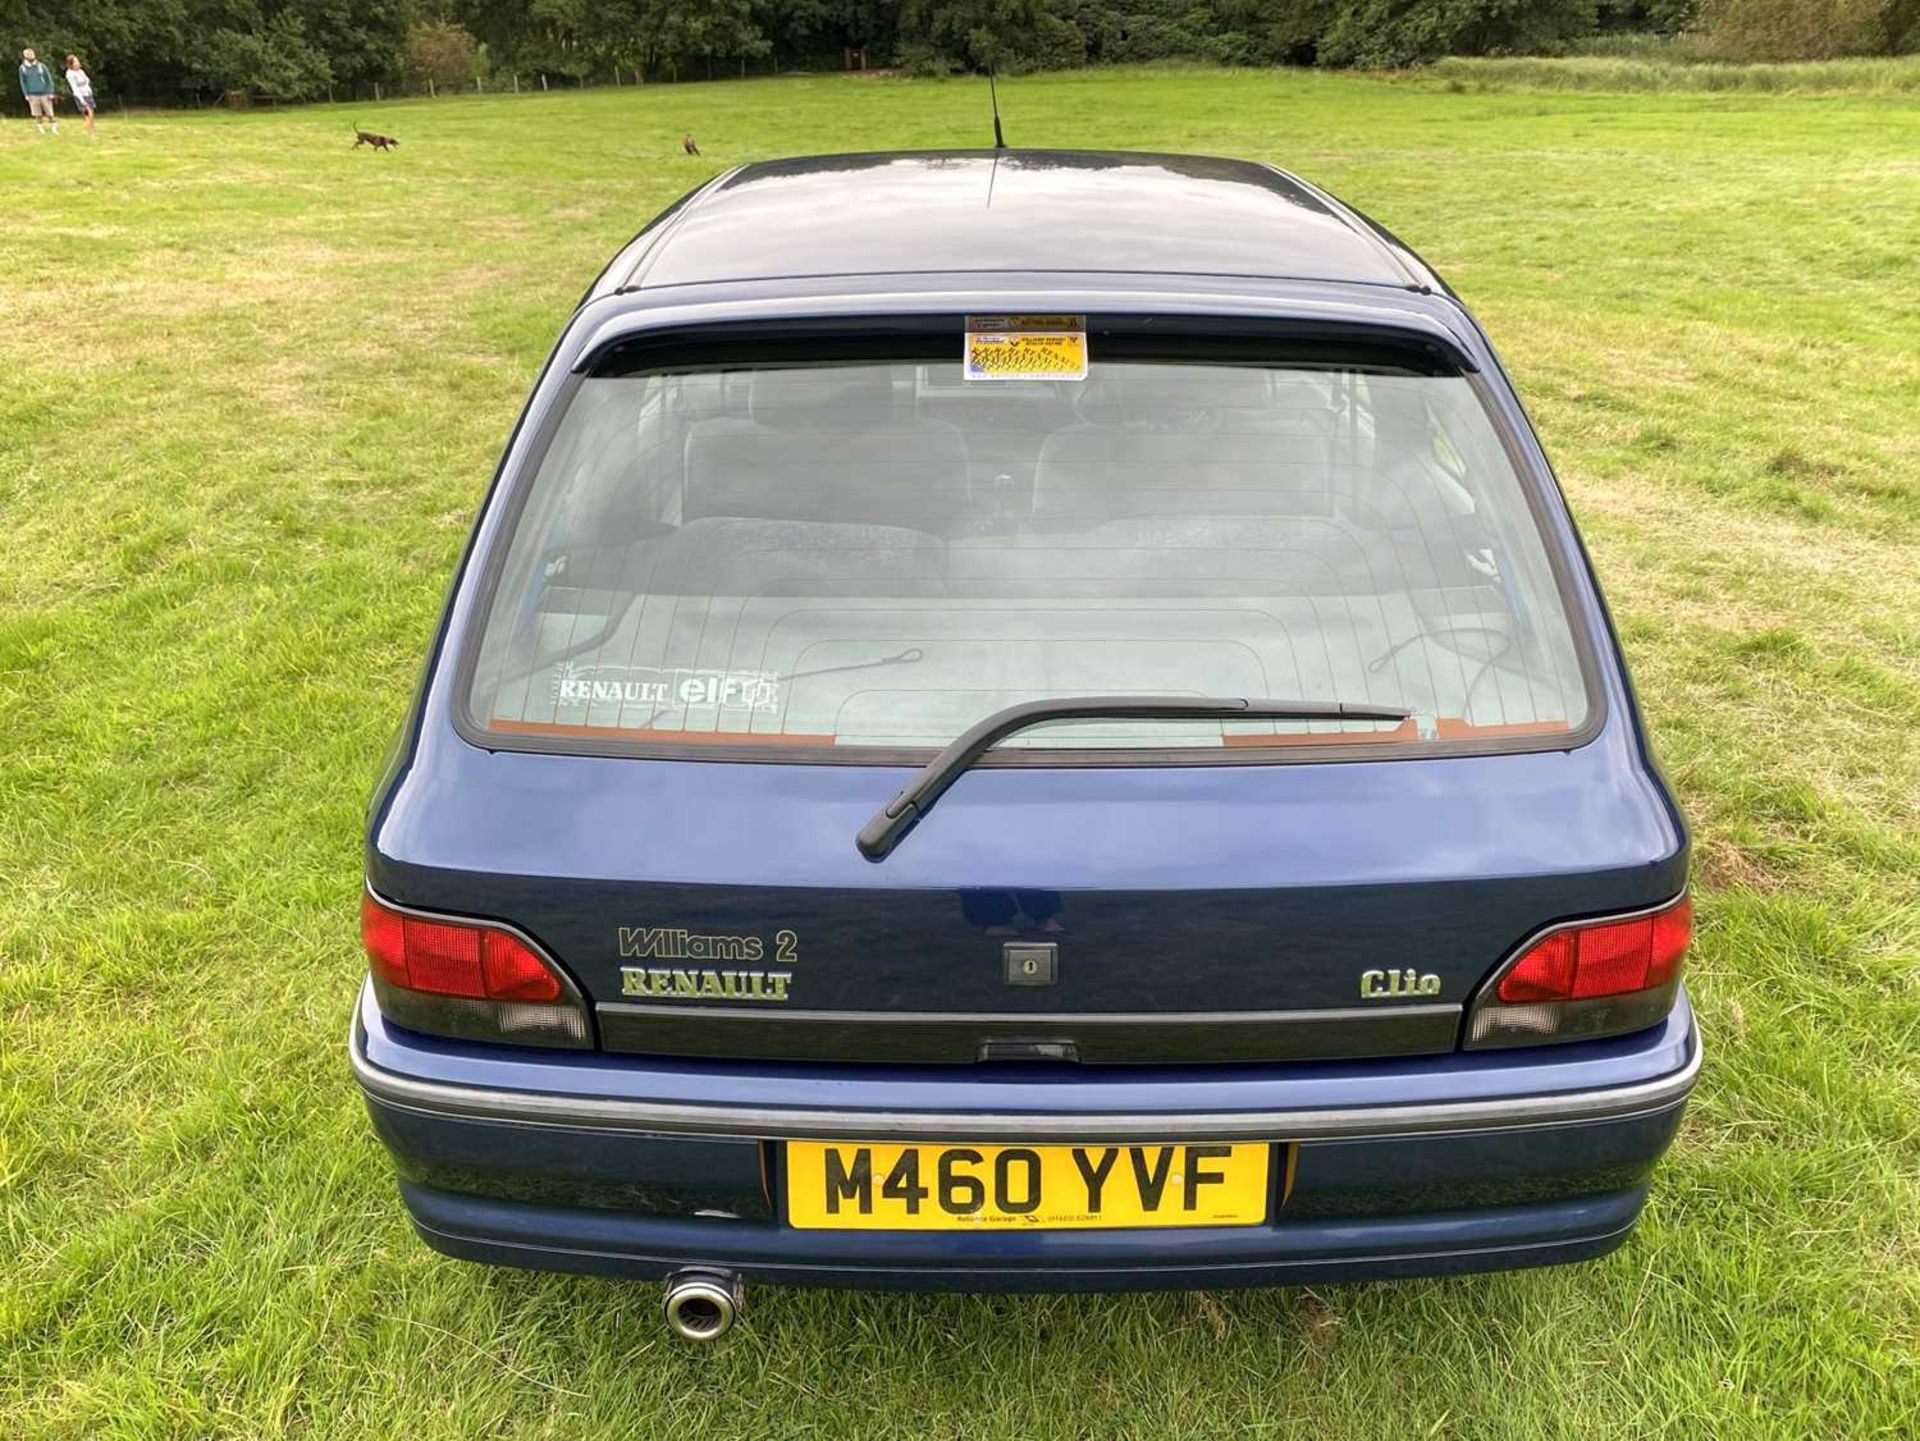 1995 Renault Clio Williams 2 UK-delivered, second series model and said to be one of just 482 produc - Image 12 of 66